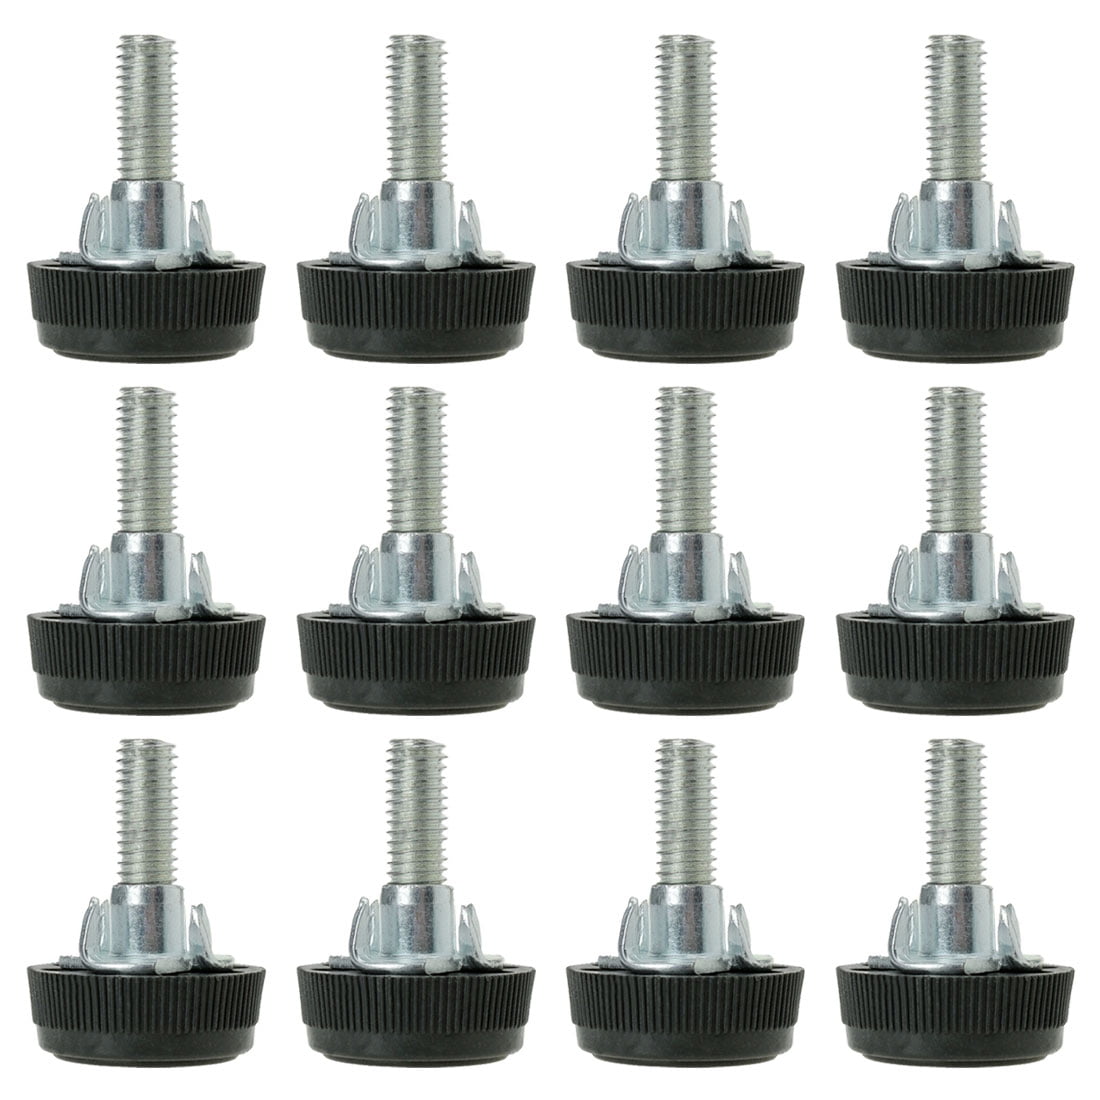 4 x FURNITURE ADJUSTABLE FEET 40x8mm LEGS T NUTS INCLUDED GLIDES LEVELLING H198 